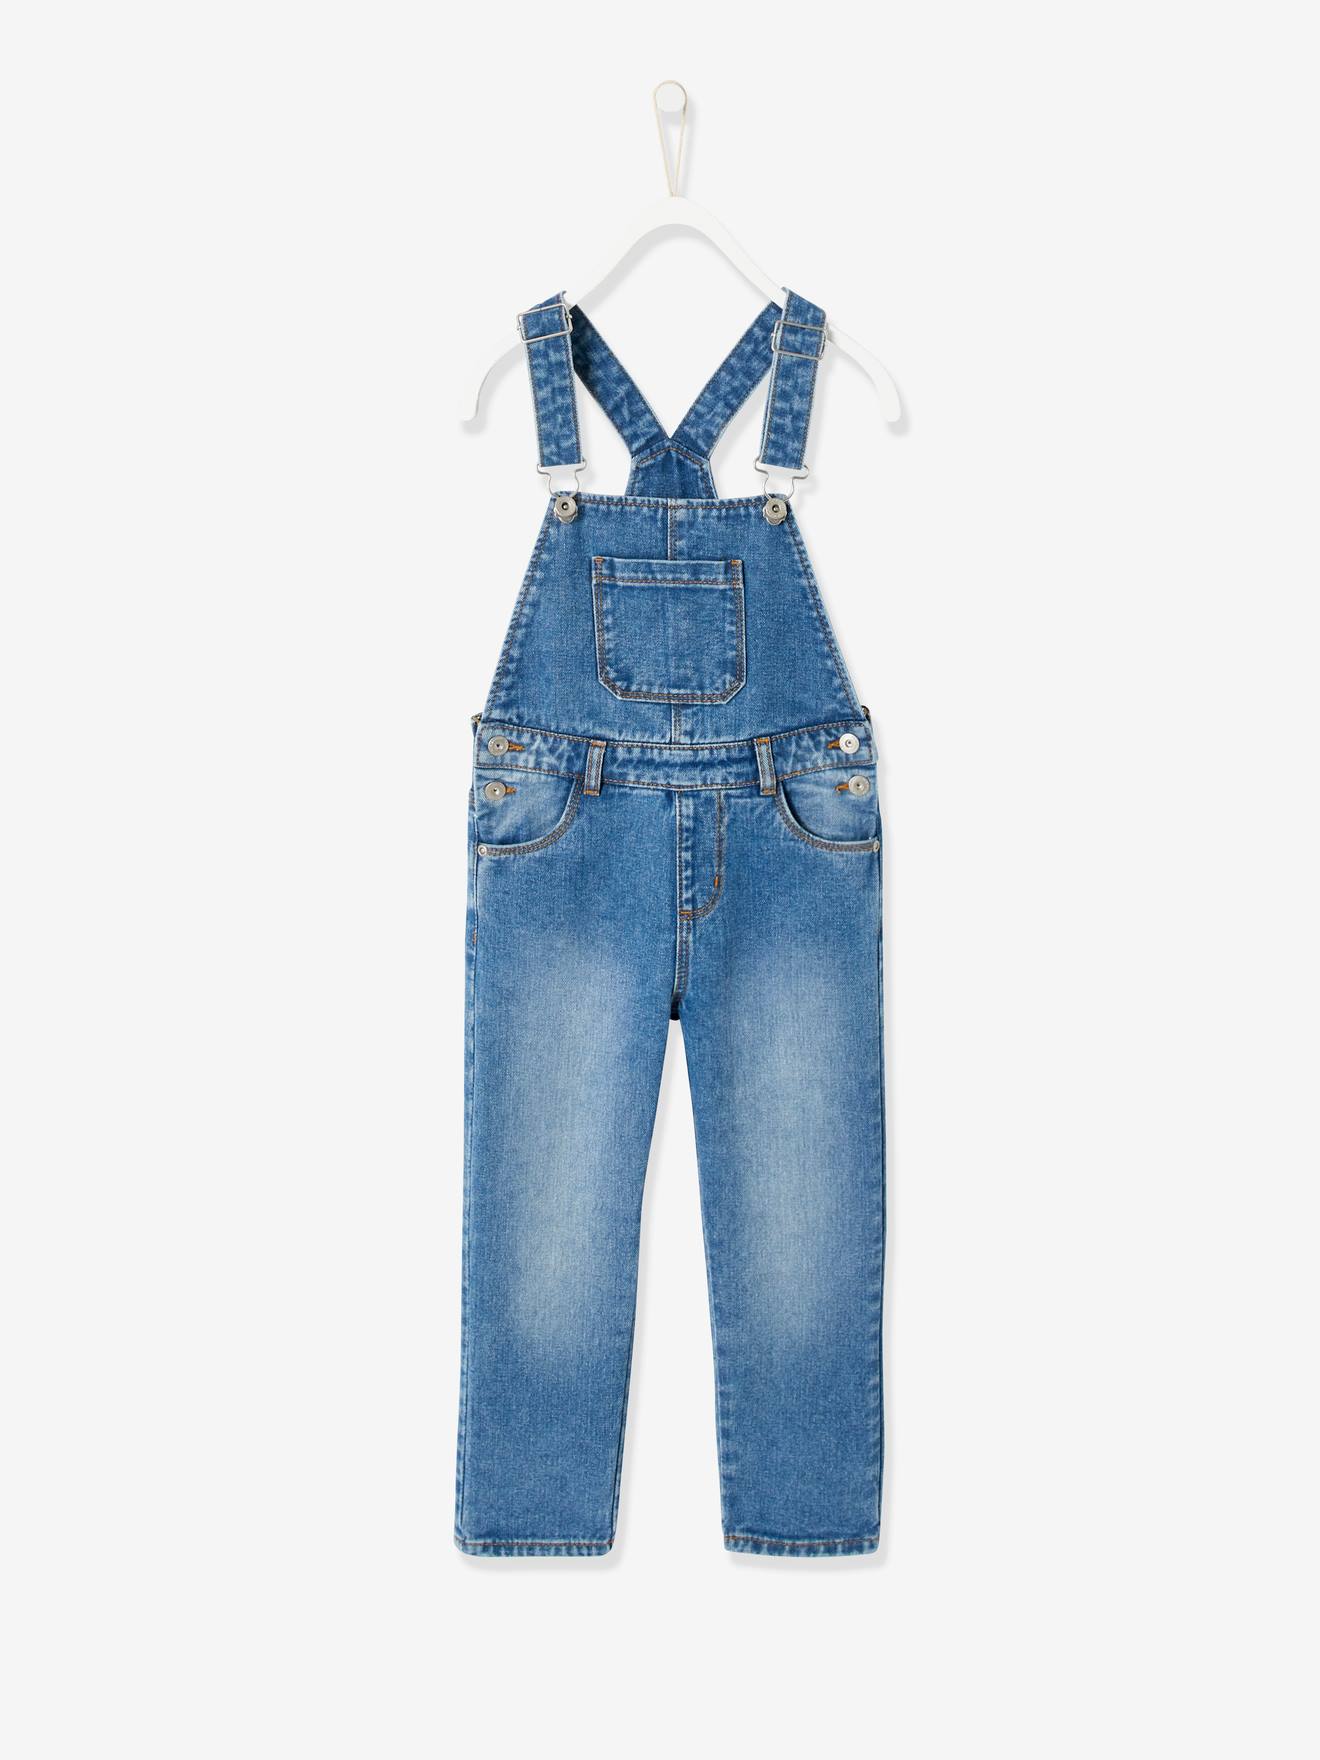 Buy DISOLVE New Girls and Women Denim Dungaree Outfit Shorts Dress Jumpsuit  Party Light Blue Color waist Size (M_28) at